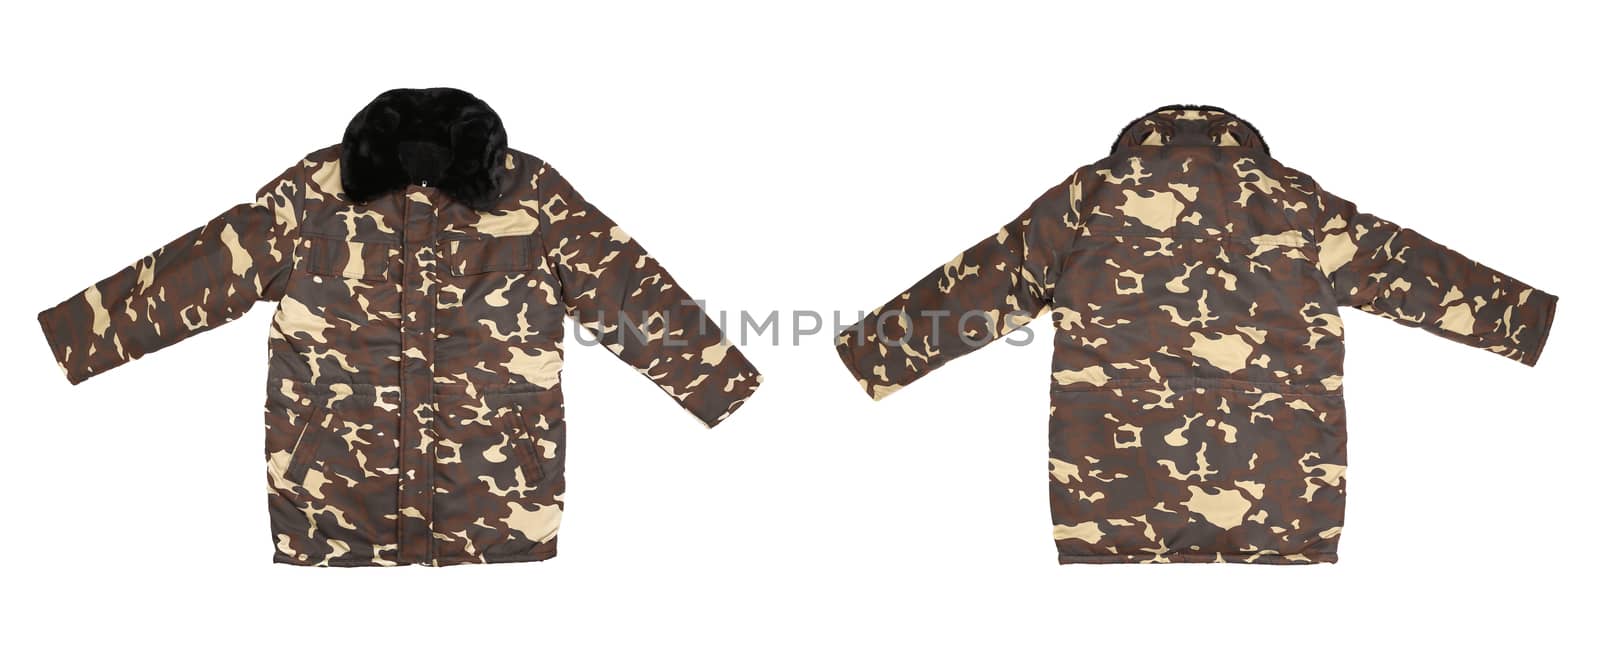 Camouflage winter jacket with black collar. Isolated on white background.